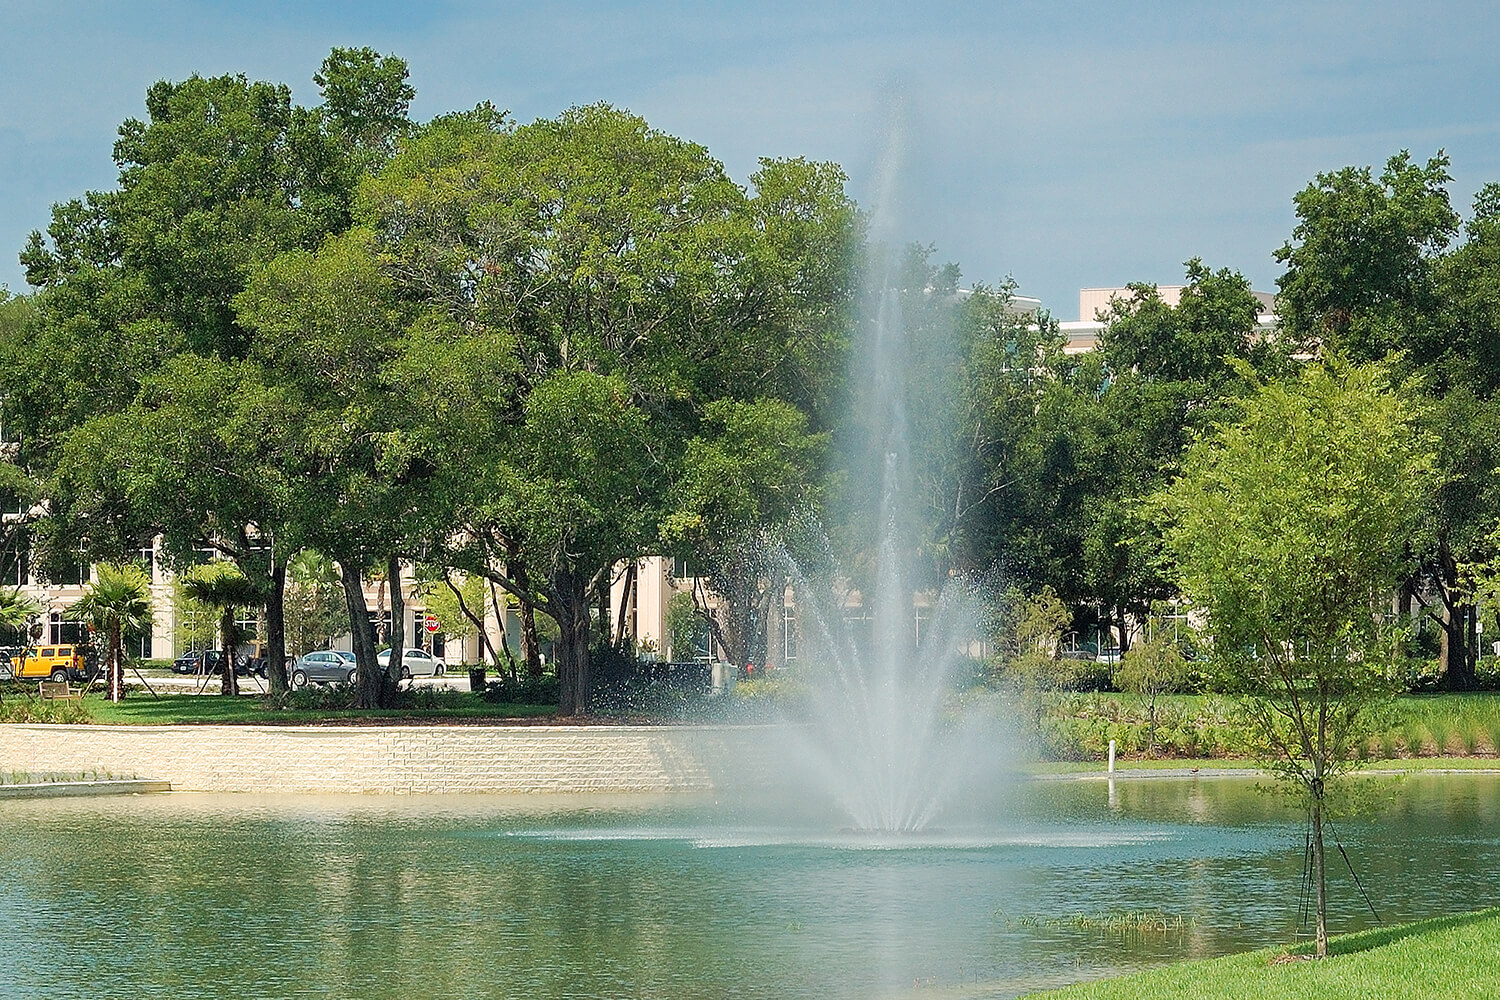 One of Otterbine's Triad Giant Aerating Fountains